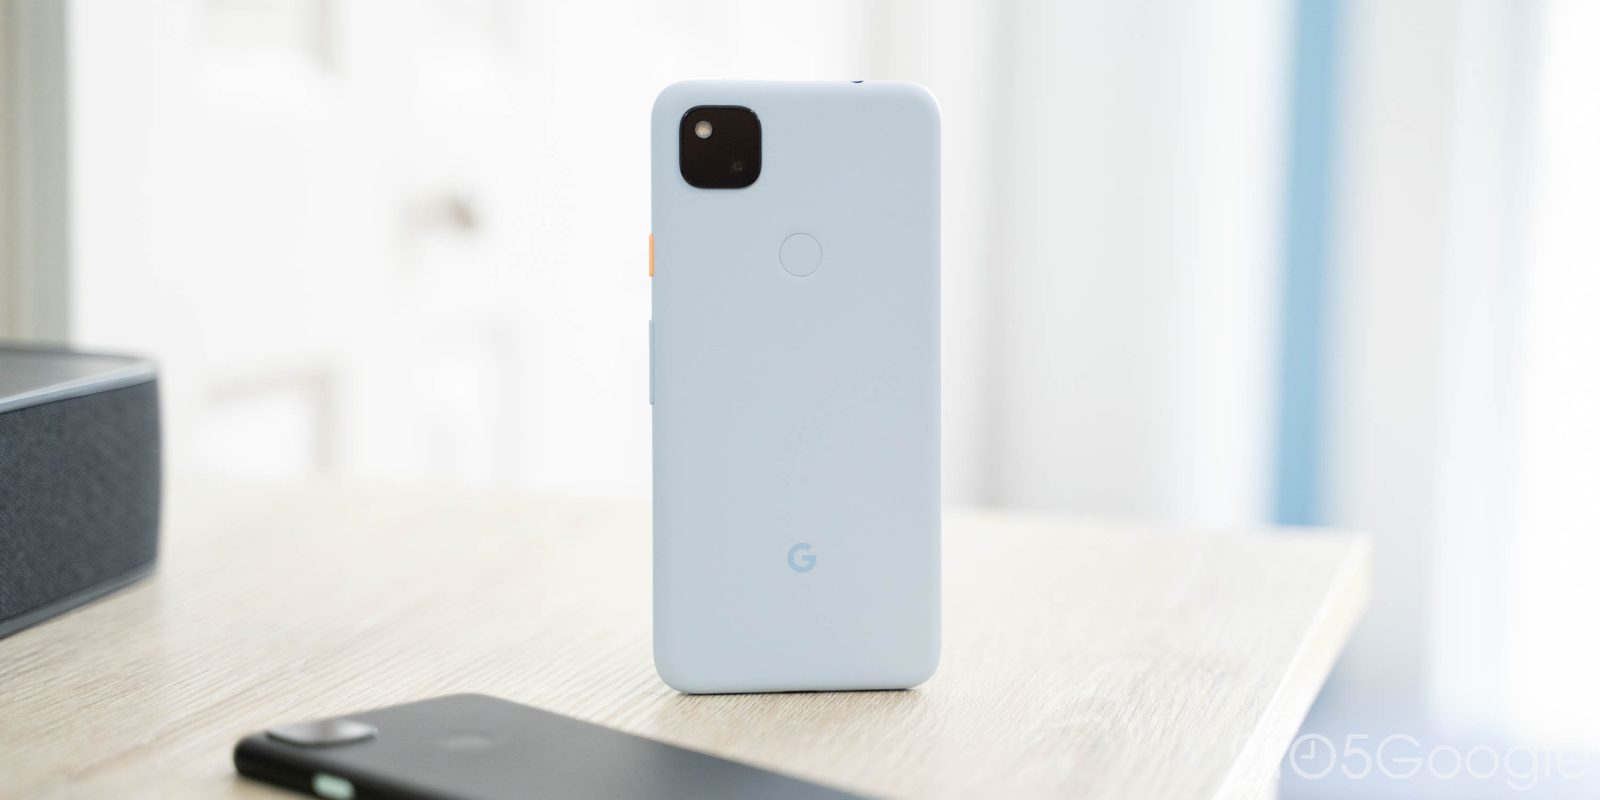 The Pixel 4a is even more delightful in Barely Blue [Gallery] - 9to5Google